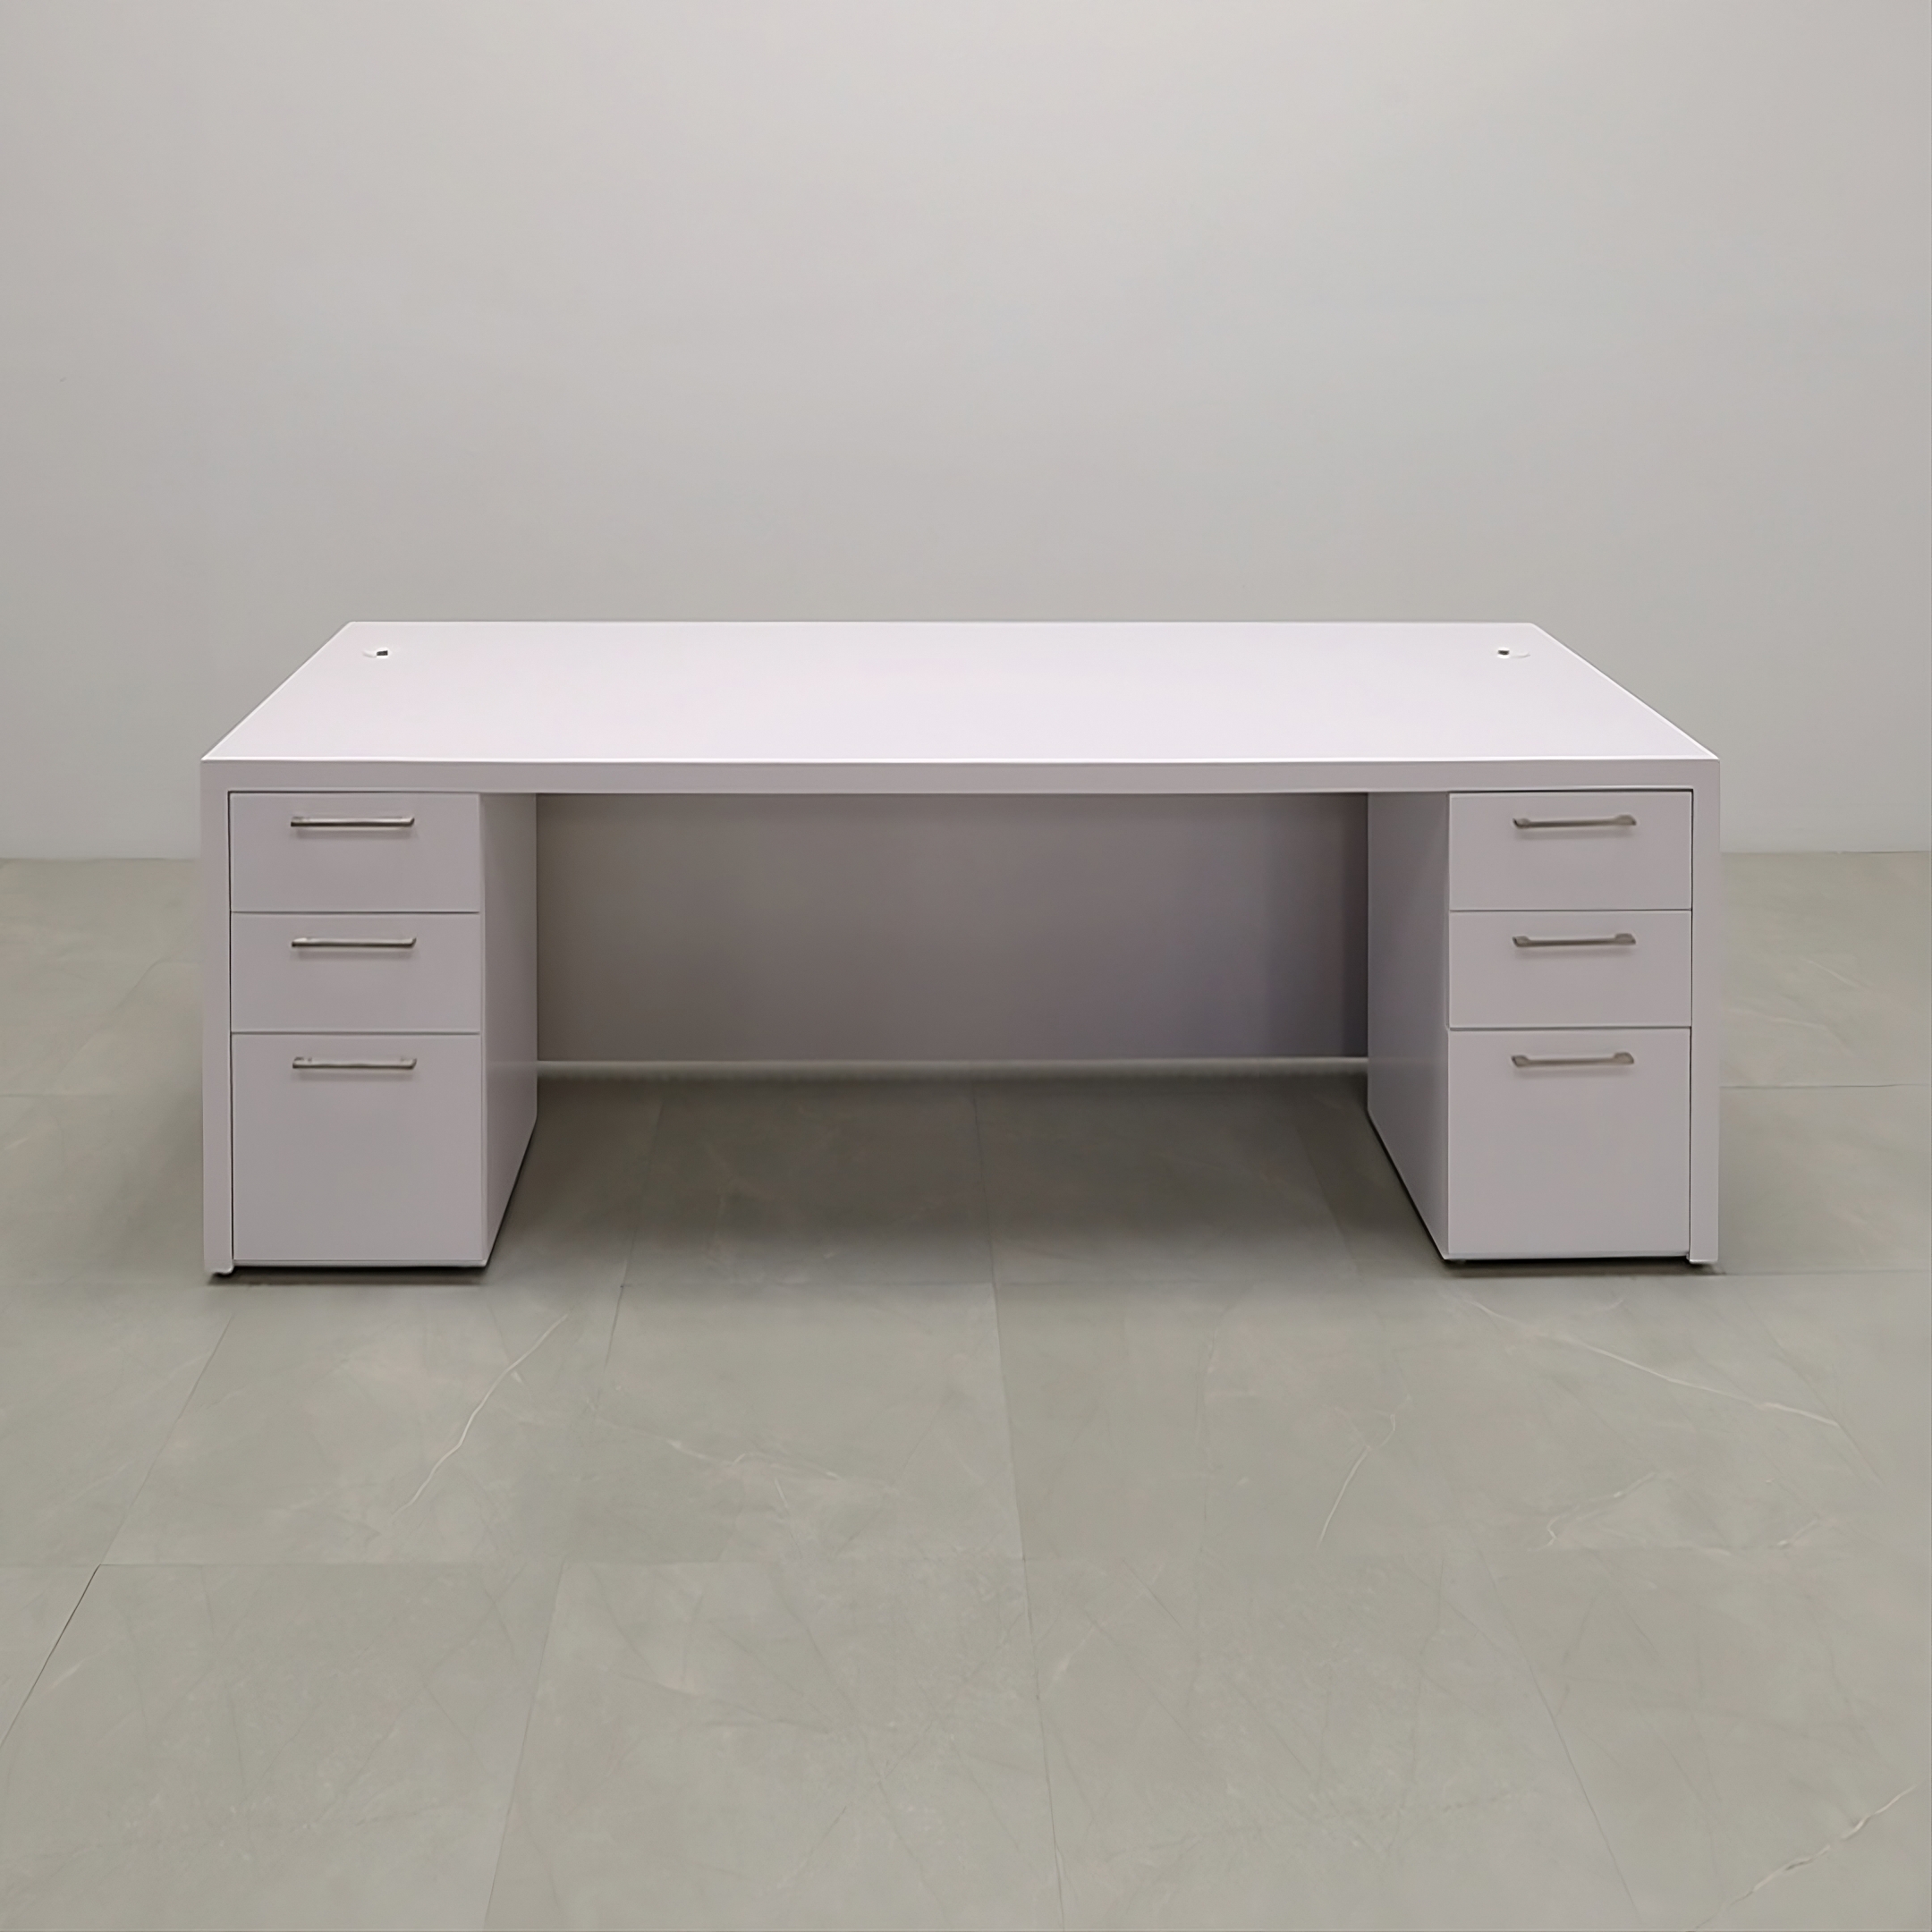 96-inch Cosmopolitan Executive Desk in white gloss laminate desk and white gloss tambour front panel with color LED shown here.